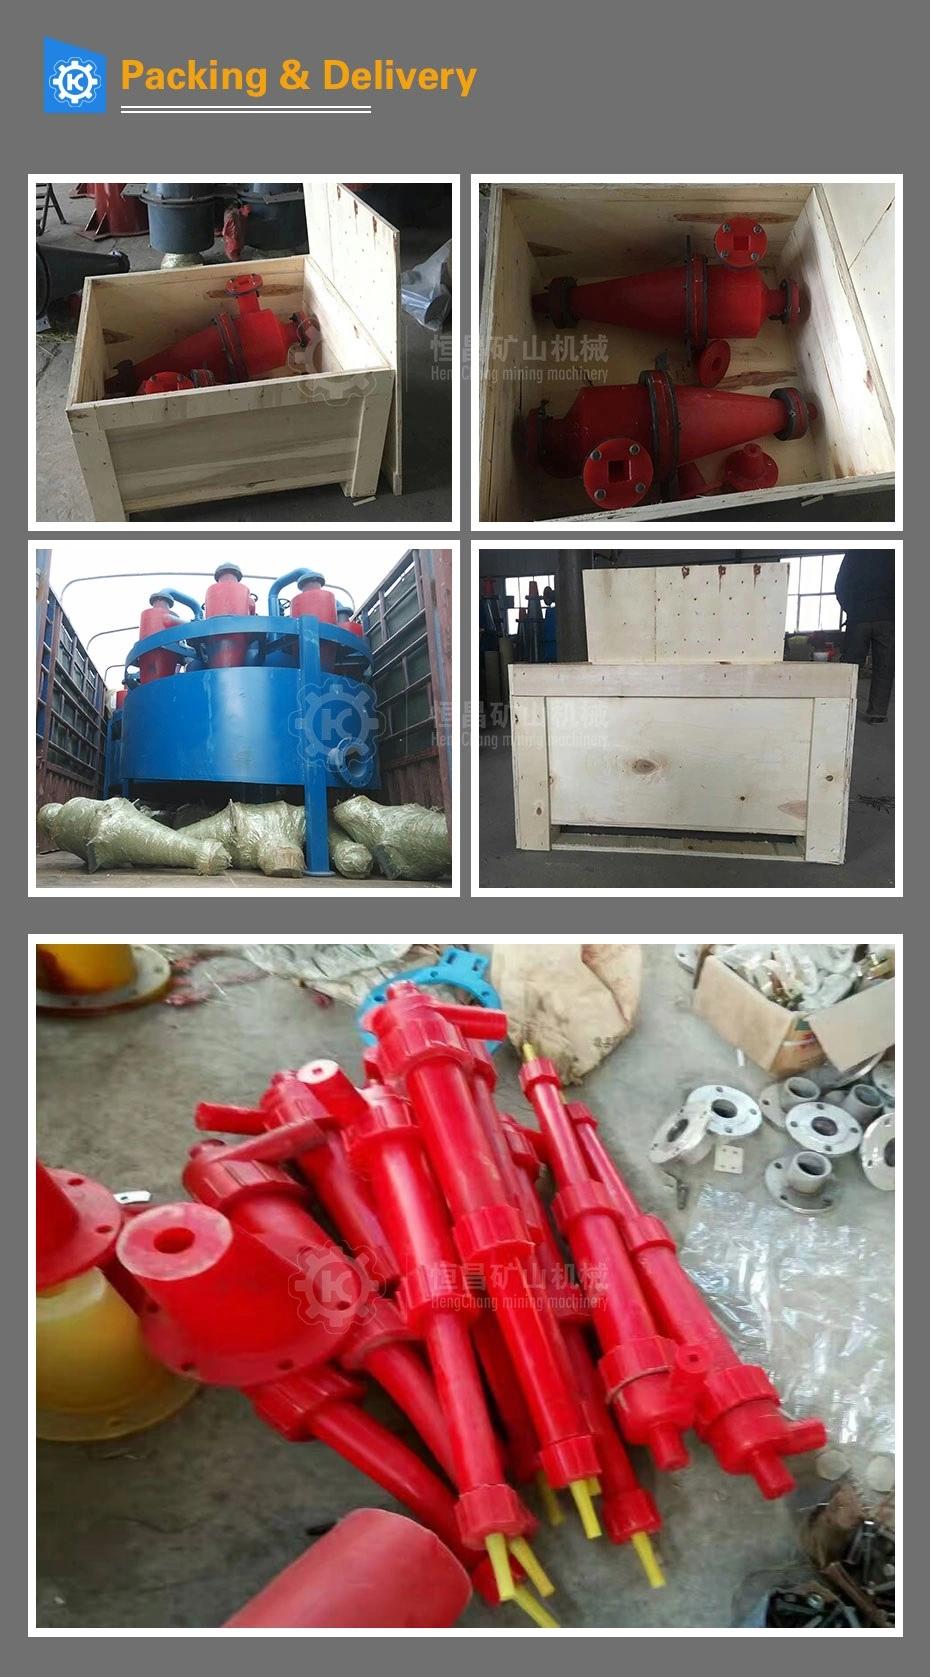 Mineral Washing Equipment Hydrocyclone Sand Clay Separator